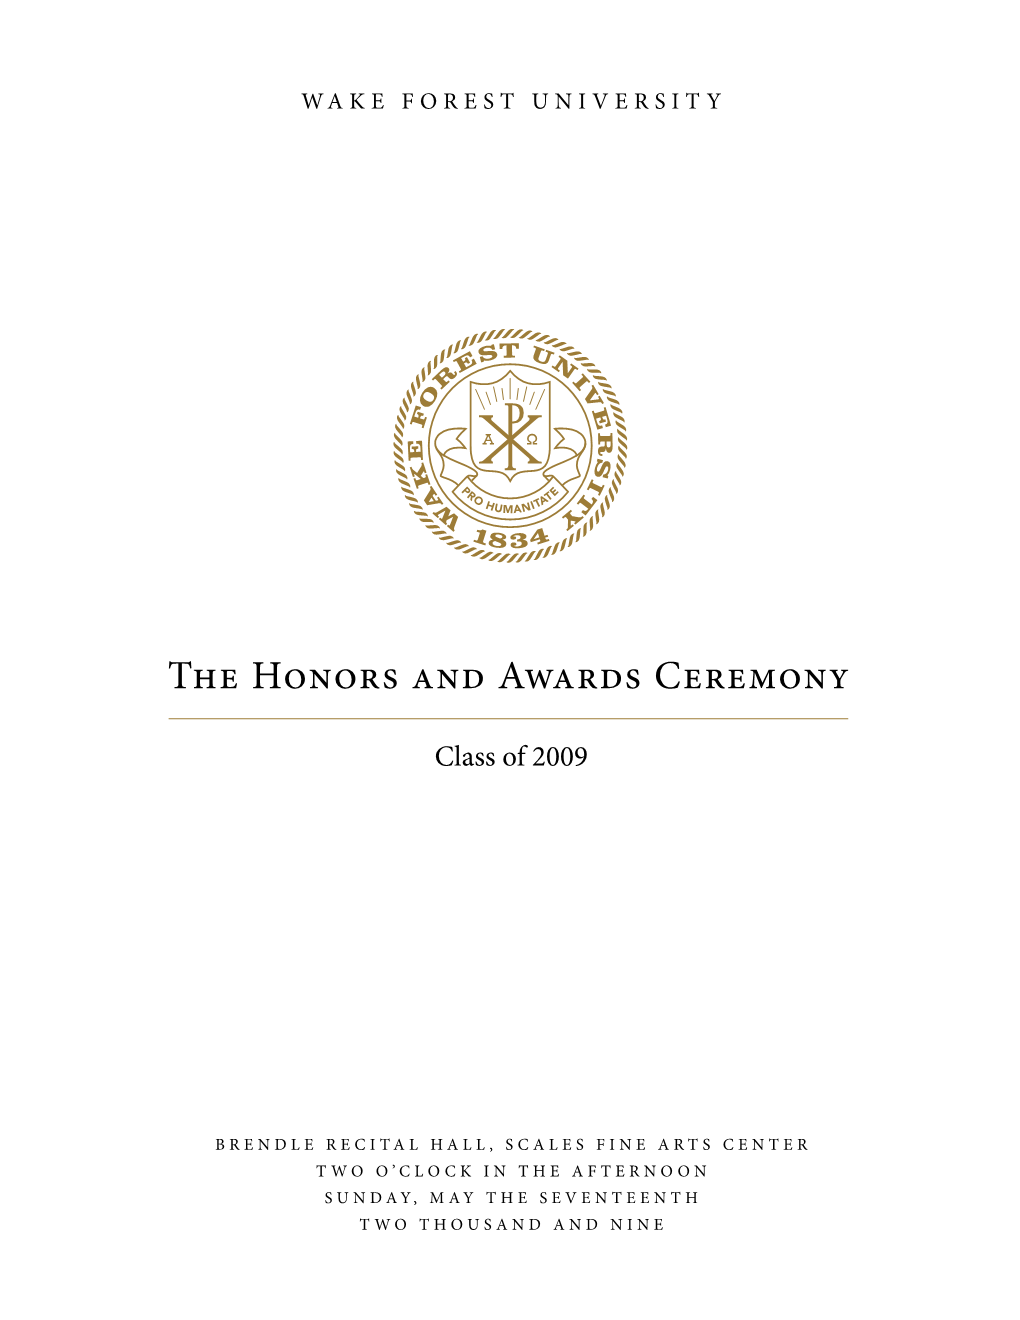 The Honors and Awards Ceremony